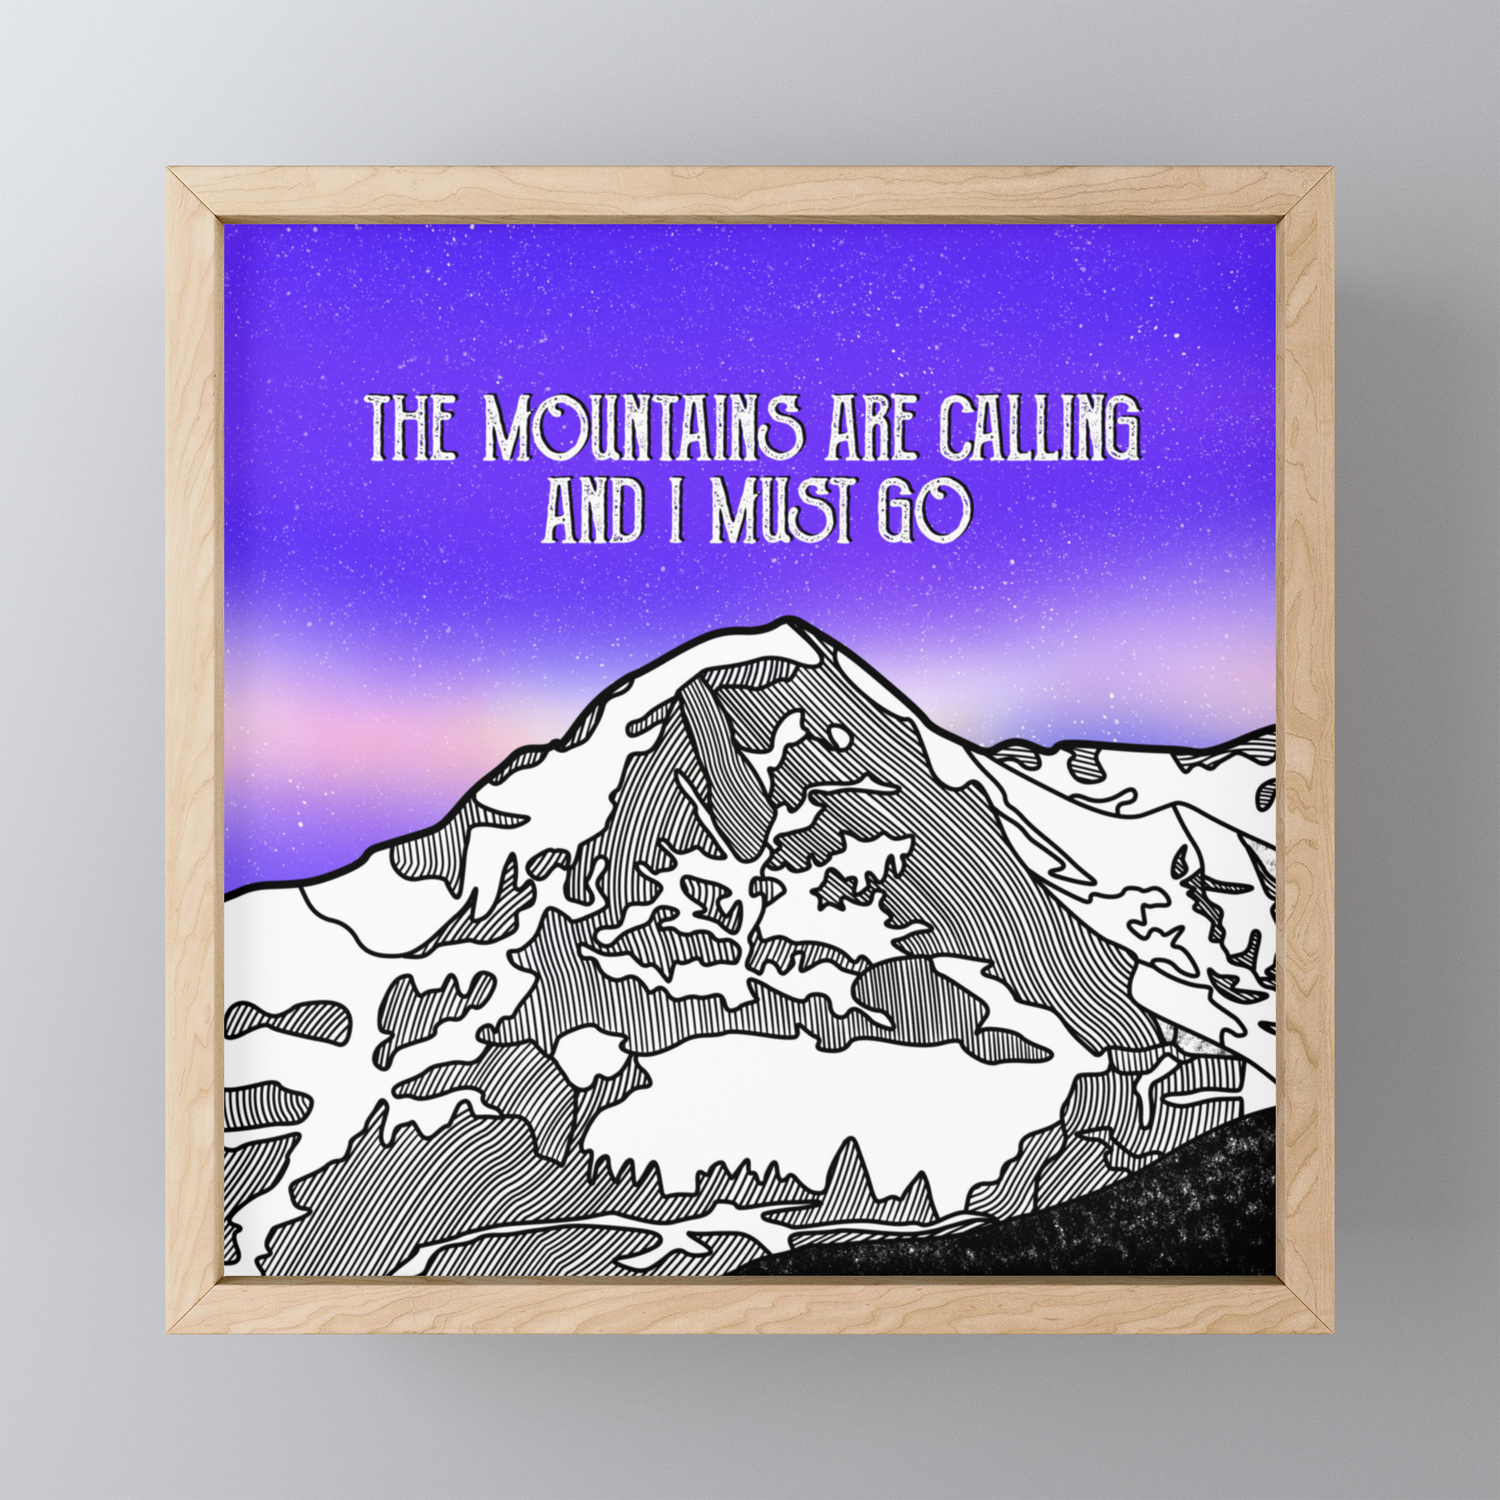 John Muir Quote The Mountains are Calling and I Must Go Hiking Wood Framed Canvas Print